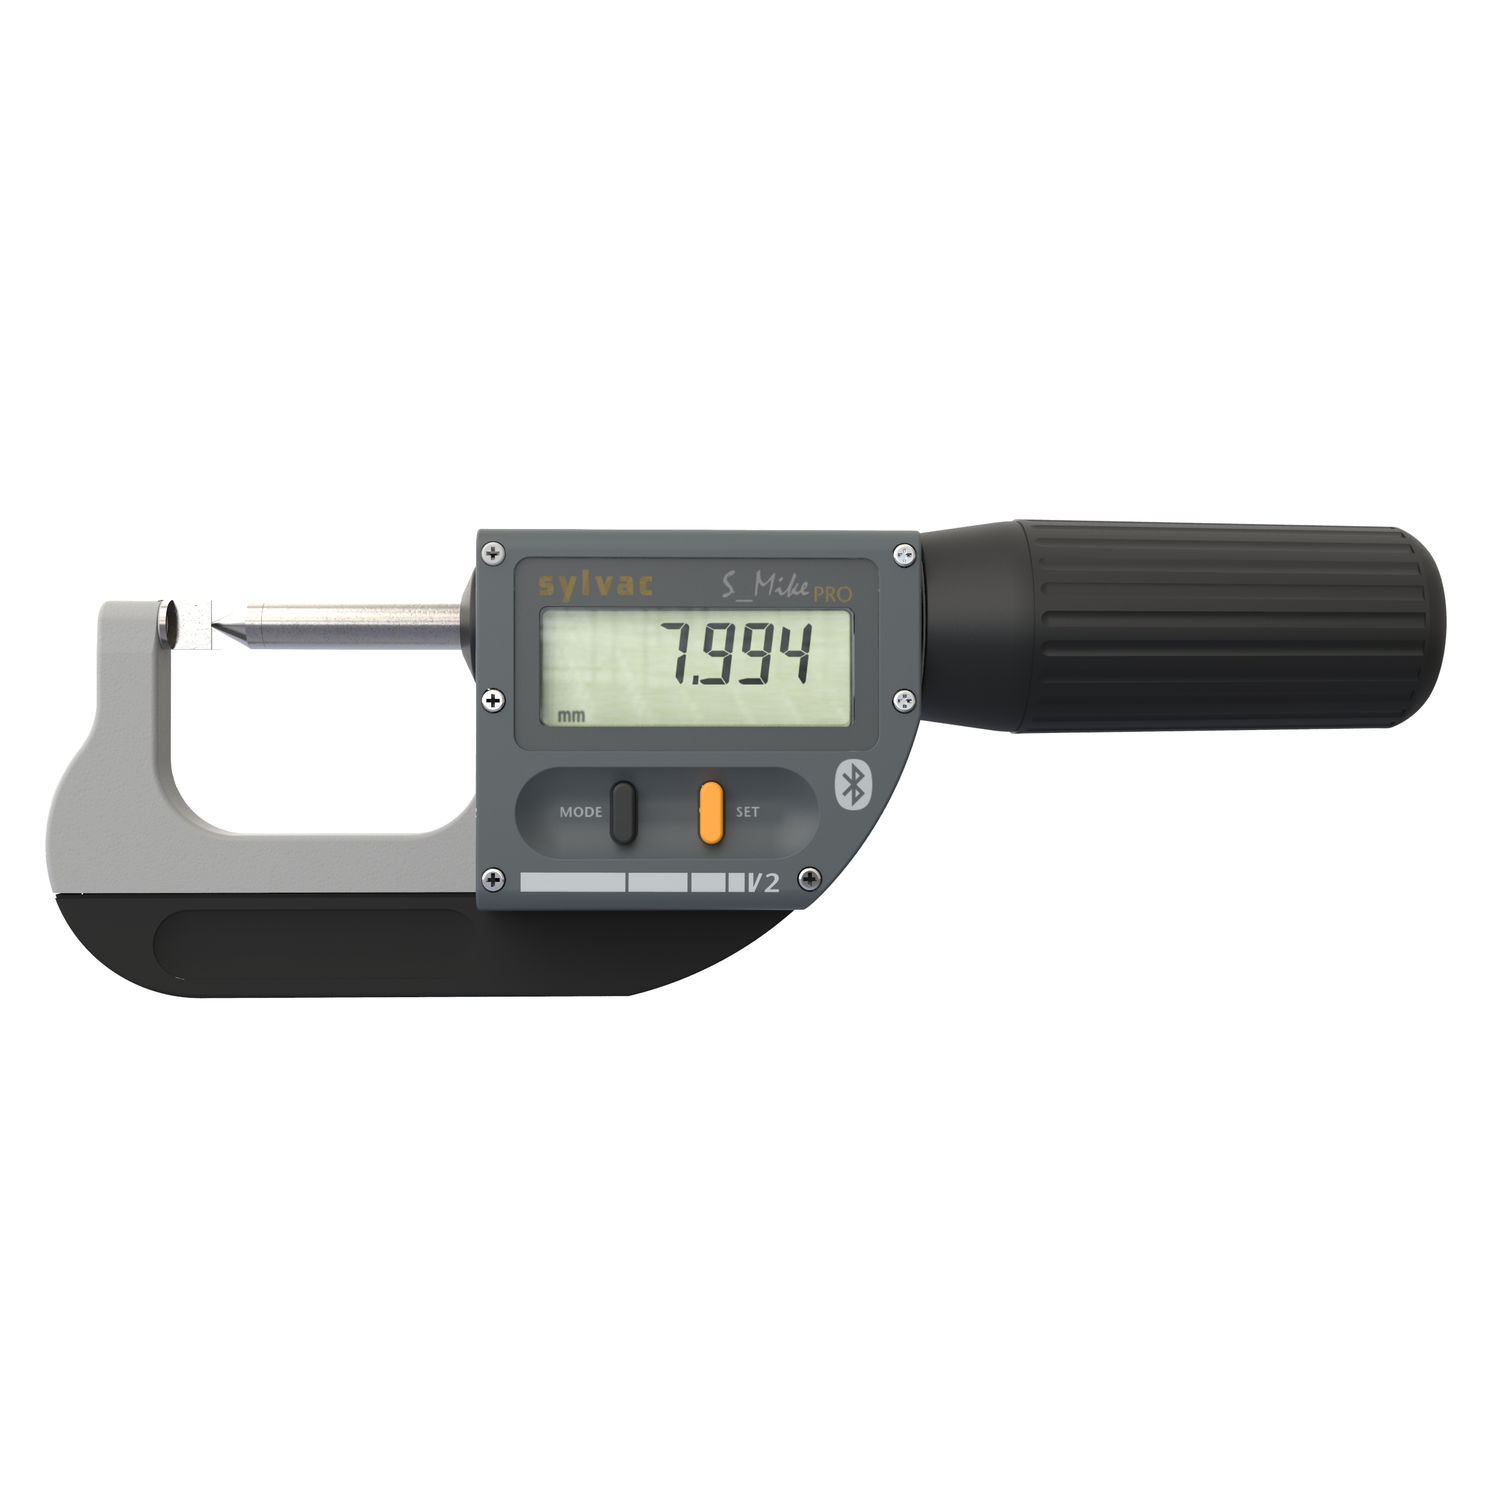 Sylvac Micrometer S_Mike PRO Point BT